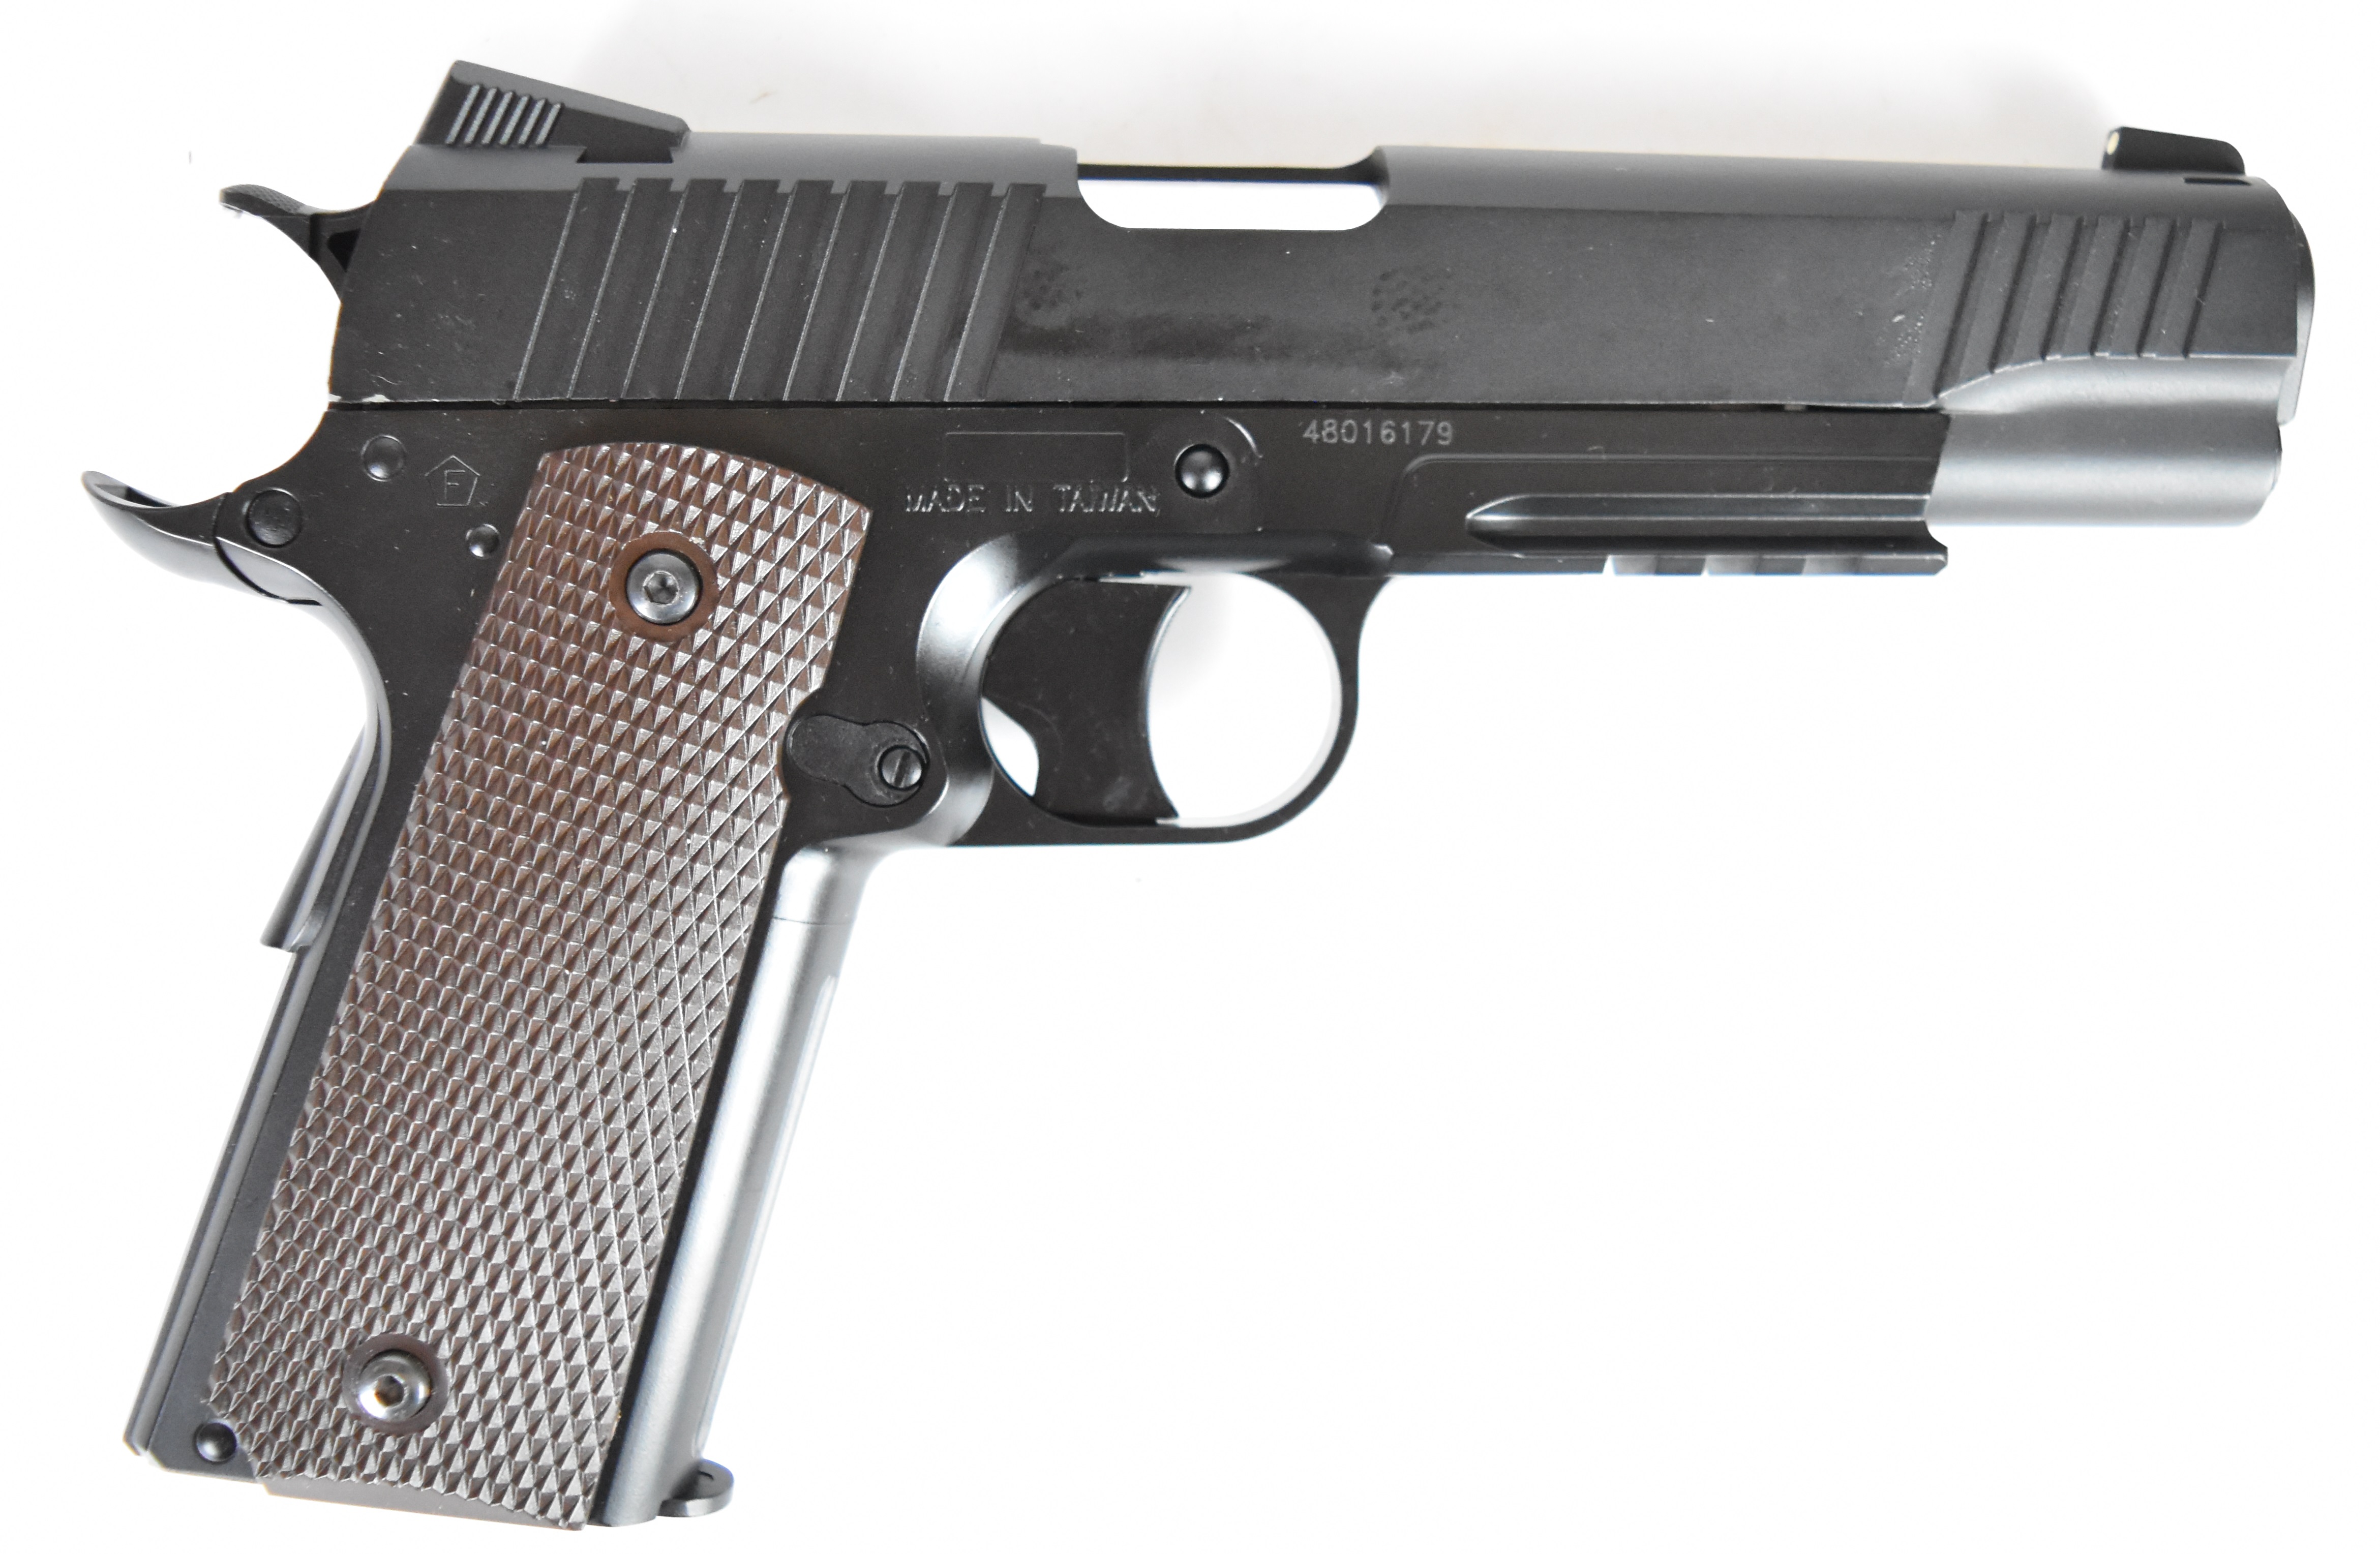 KWC M45 A1 .177 CO2 air pistol with chequered grips and 21 shot magazine, serial number 48016179, in - Image 2 of 12